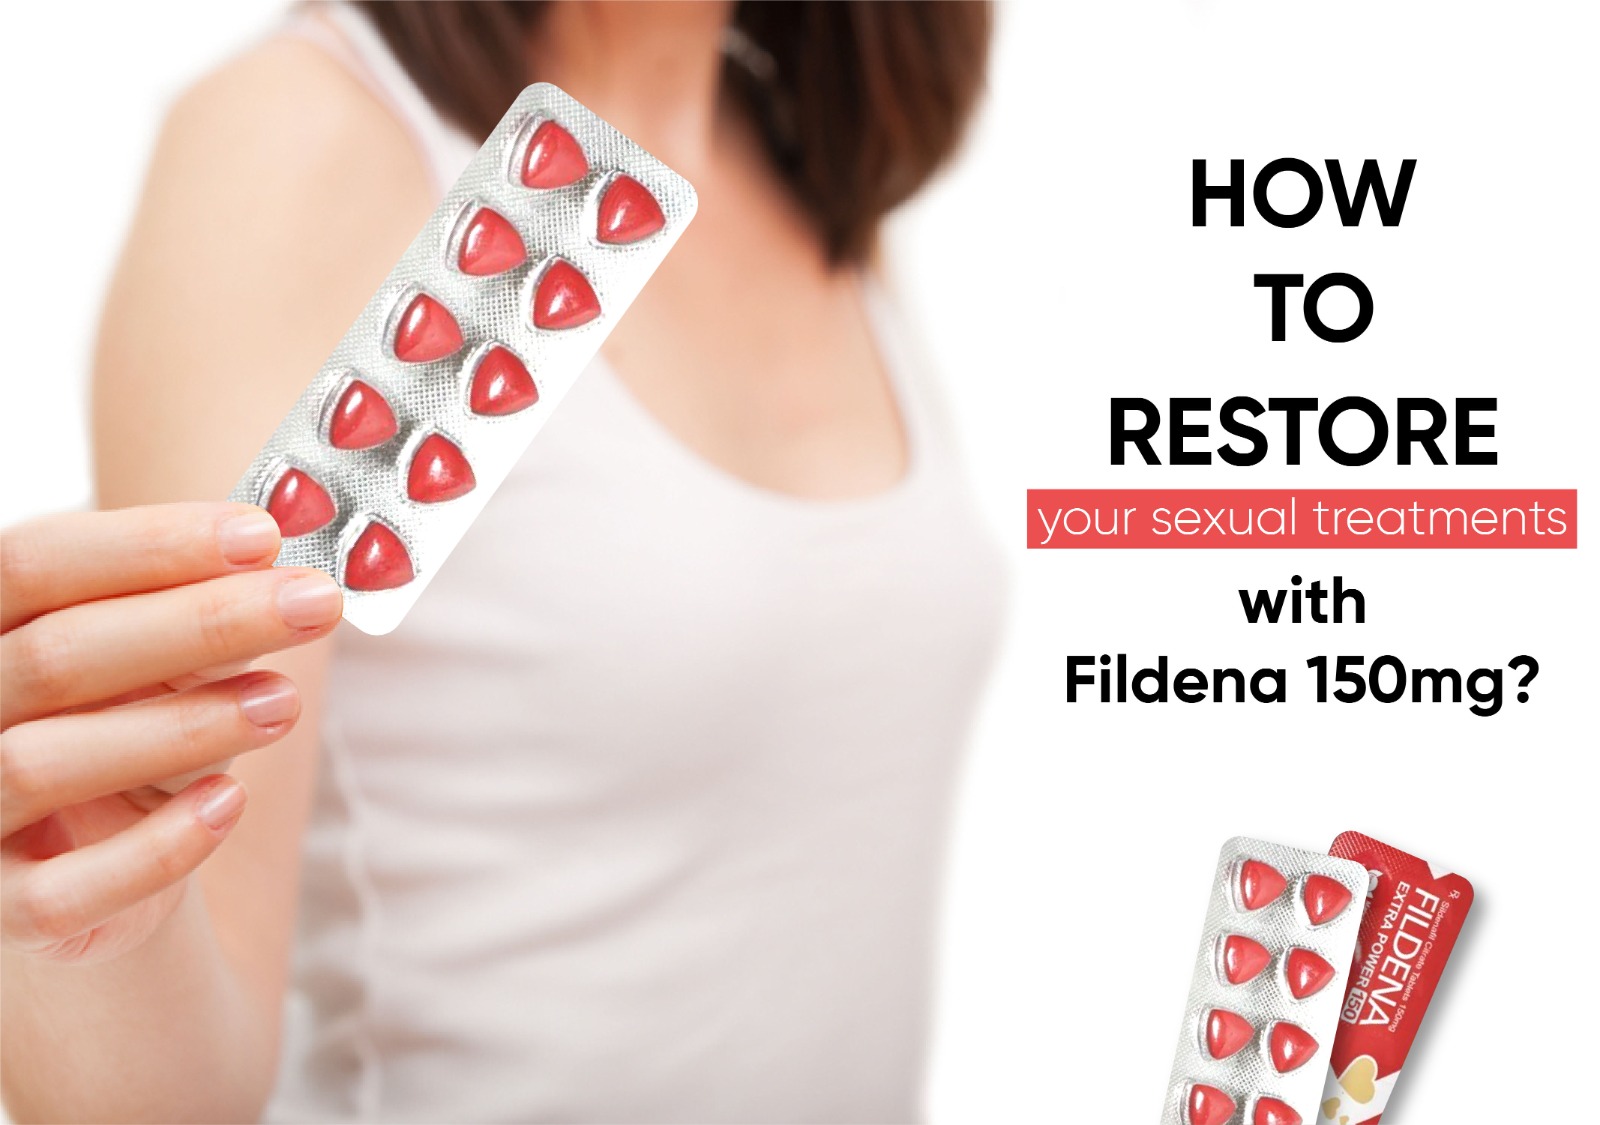 how-to-restore-your-sexual-treatments-with-fildena-150mg?